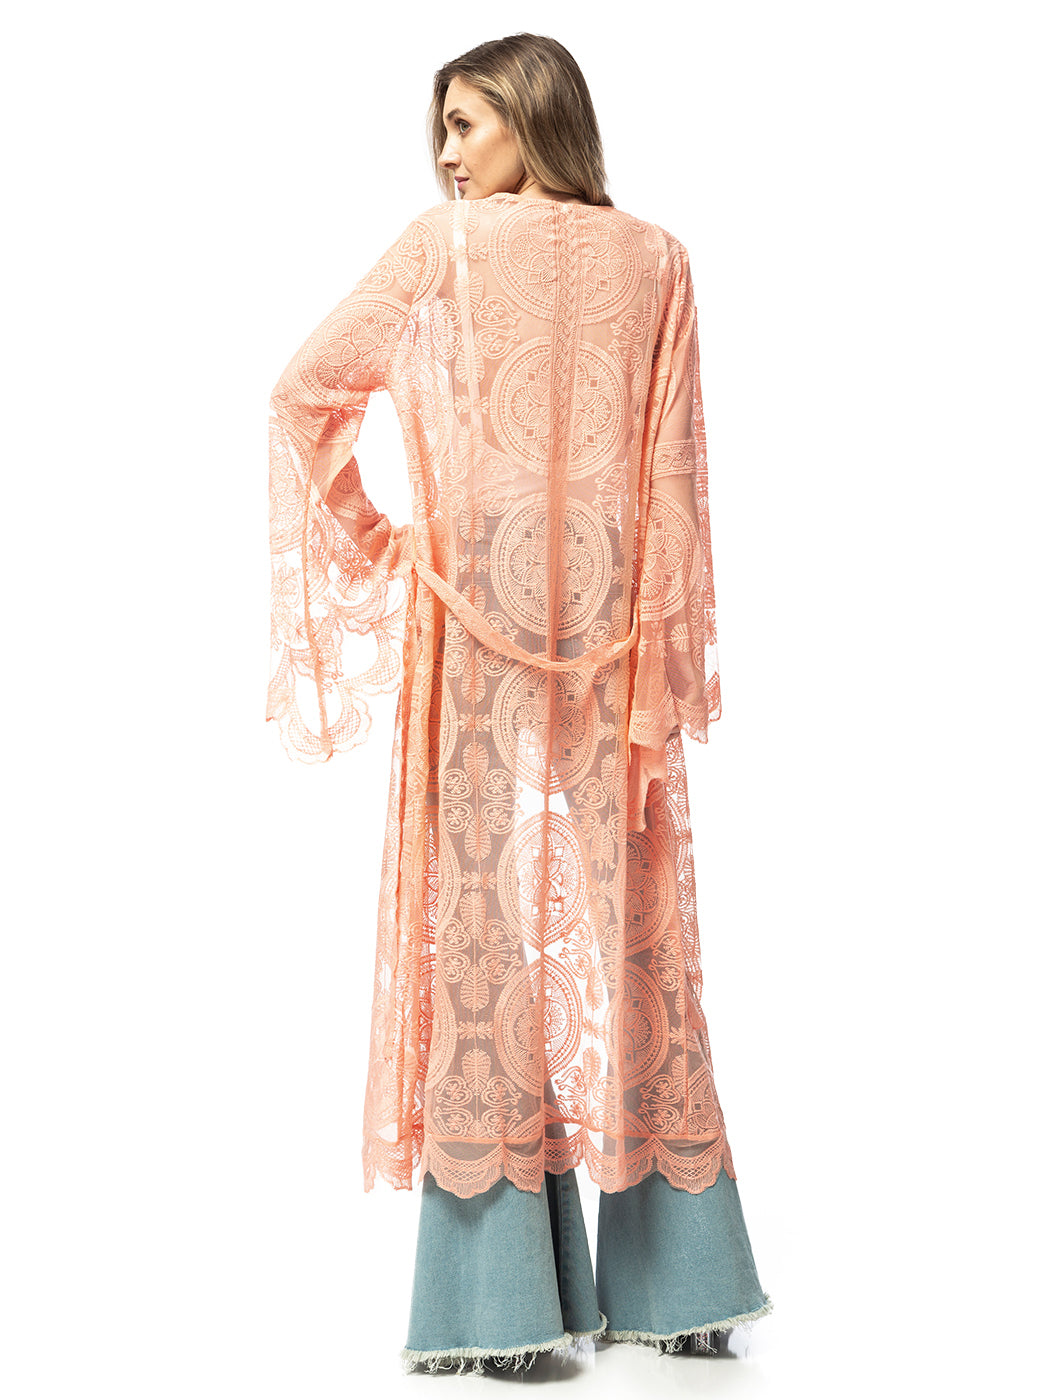 Lace Embroidered Kimono Swimsuit Cover-Up